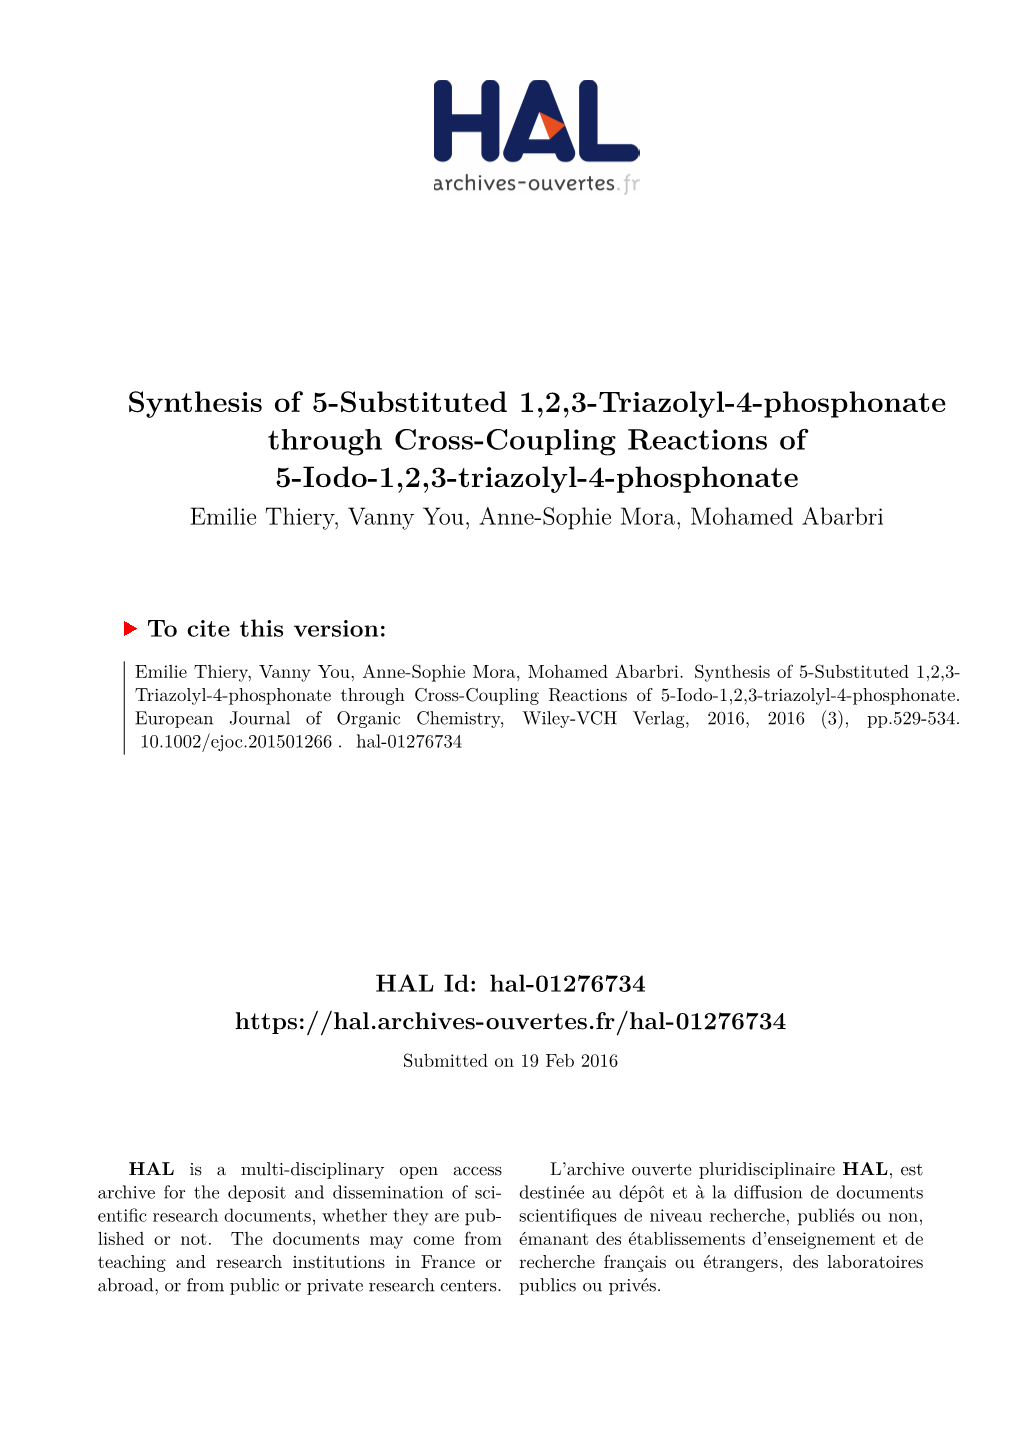 Synthesis of 5-Substituted 1,2,3-Triazolyl-4-Phosphonate